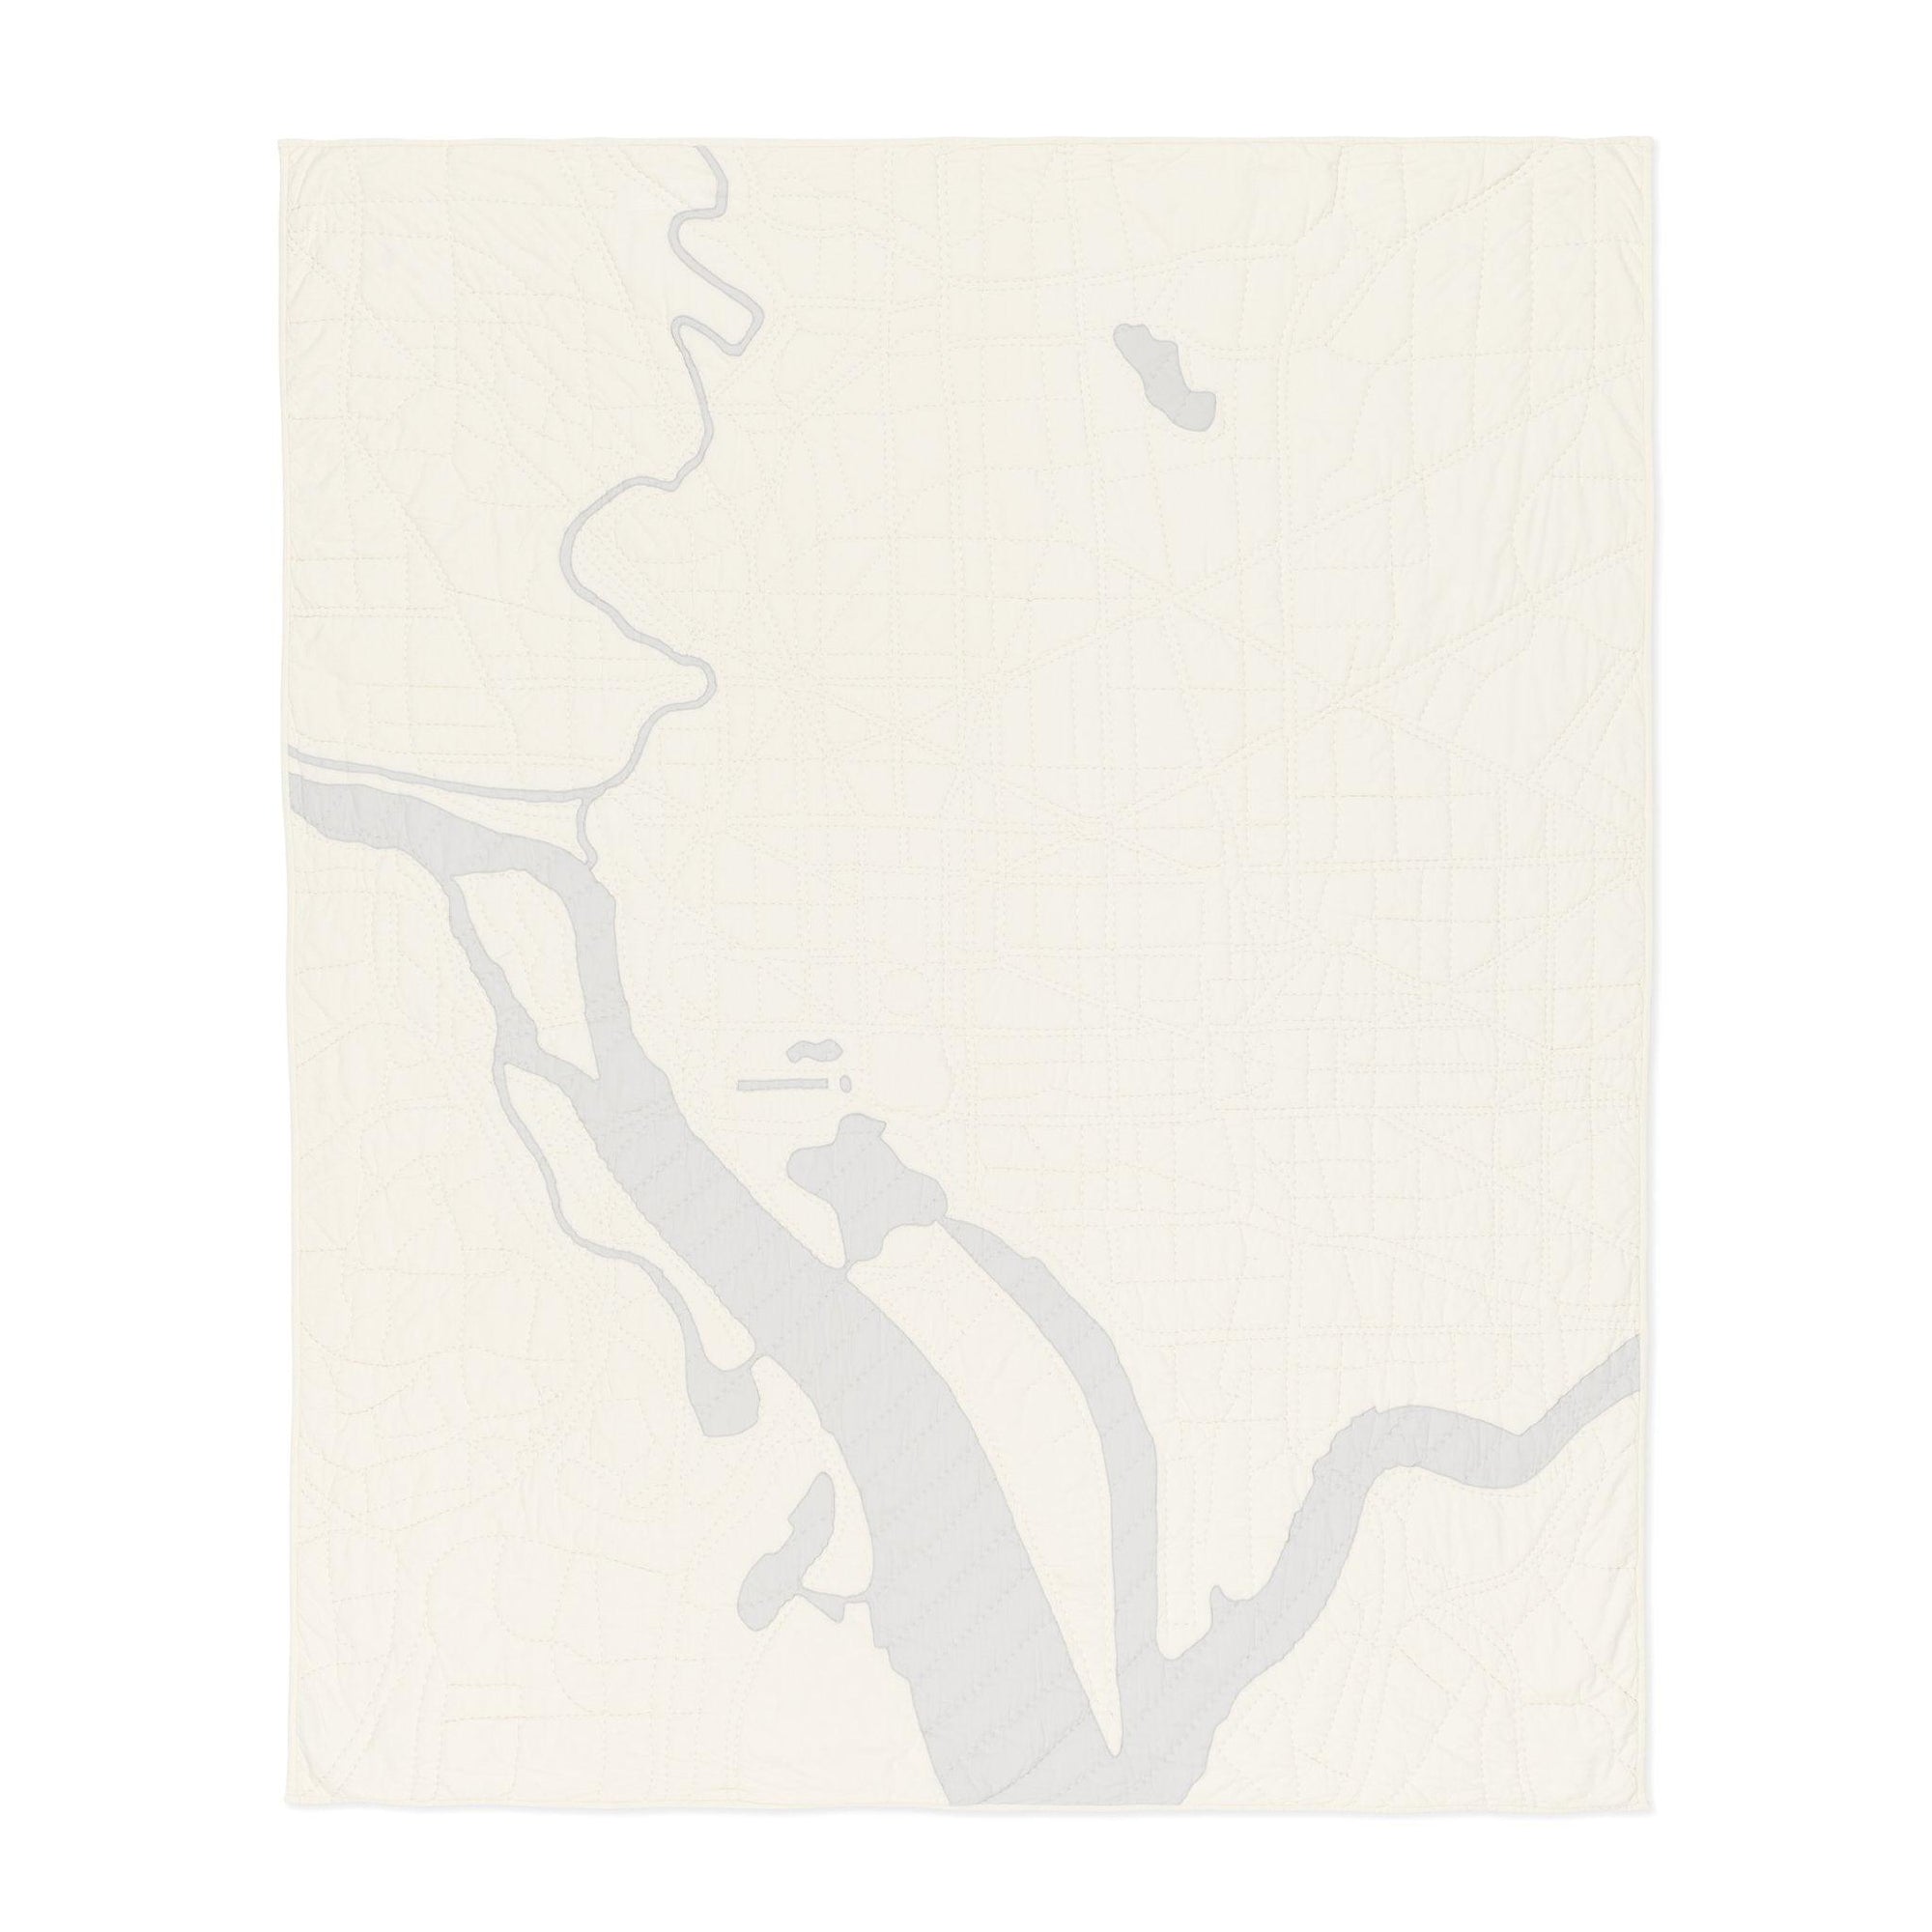 Heirloom quilt, a hand-stitched map of Washington DC with ivory land and gray water.